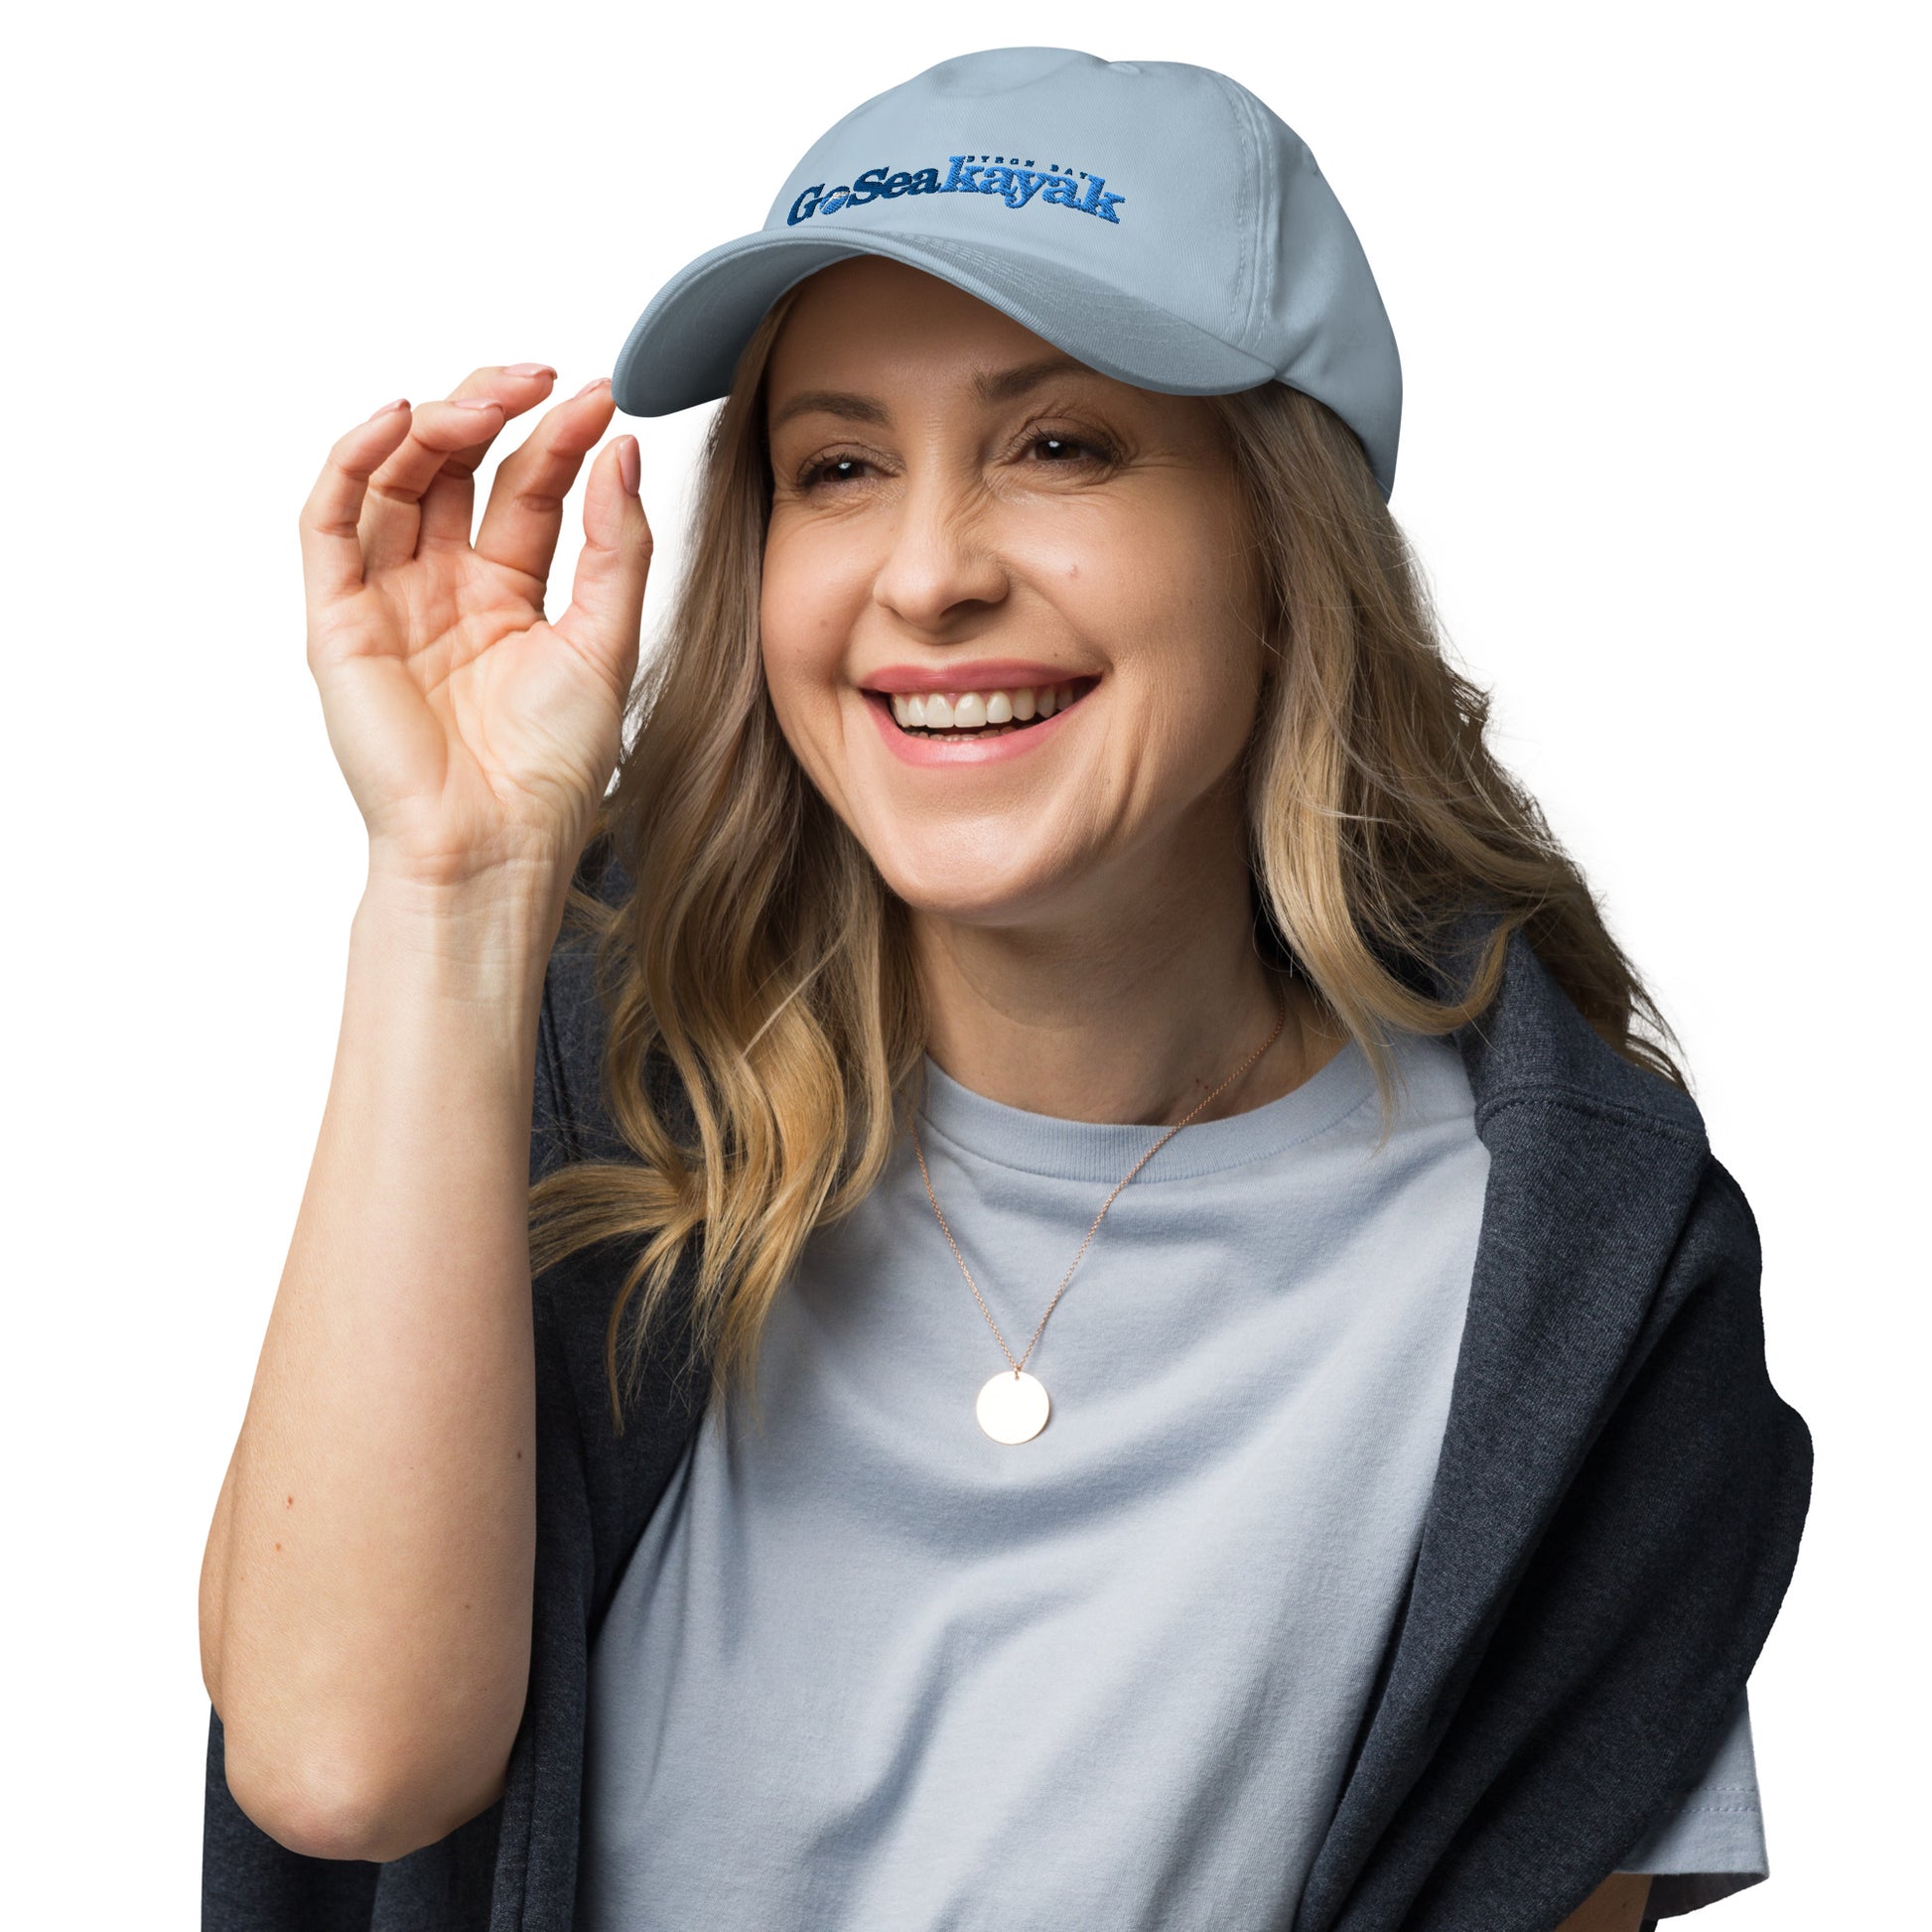  Unisex Cap - Light Blue - Front view on woman's head with hand touching brim -Go Sea Kayak logo on front  - Genuine Byron Bay Merchandise | Produced by Go Sea Kayak Byron Bay